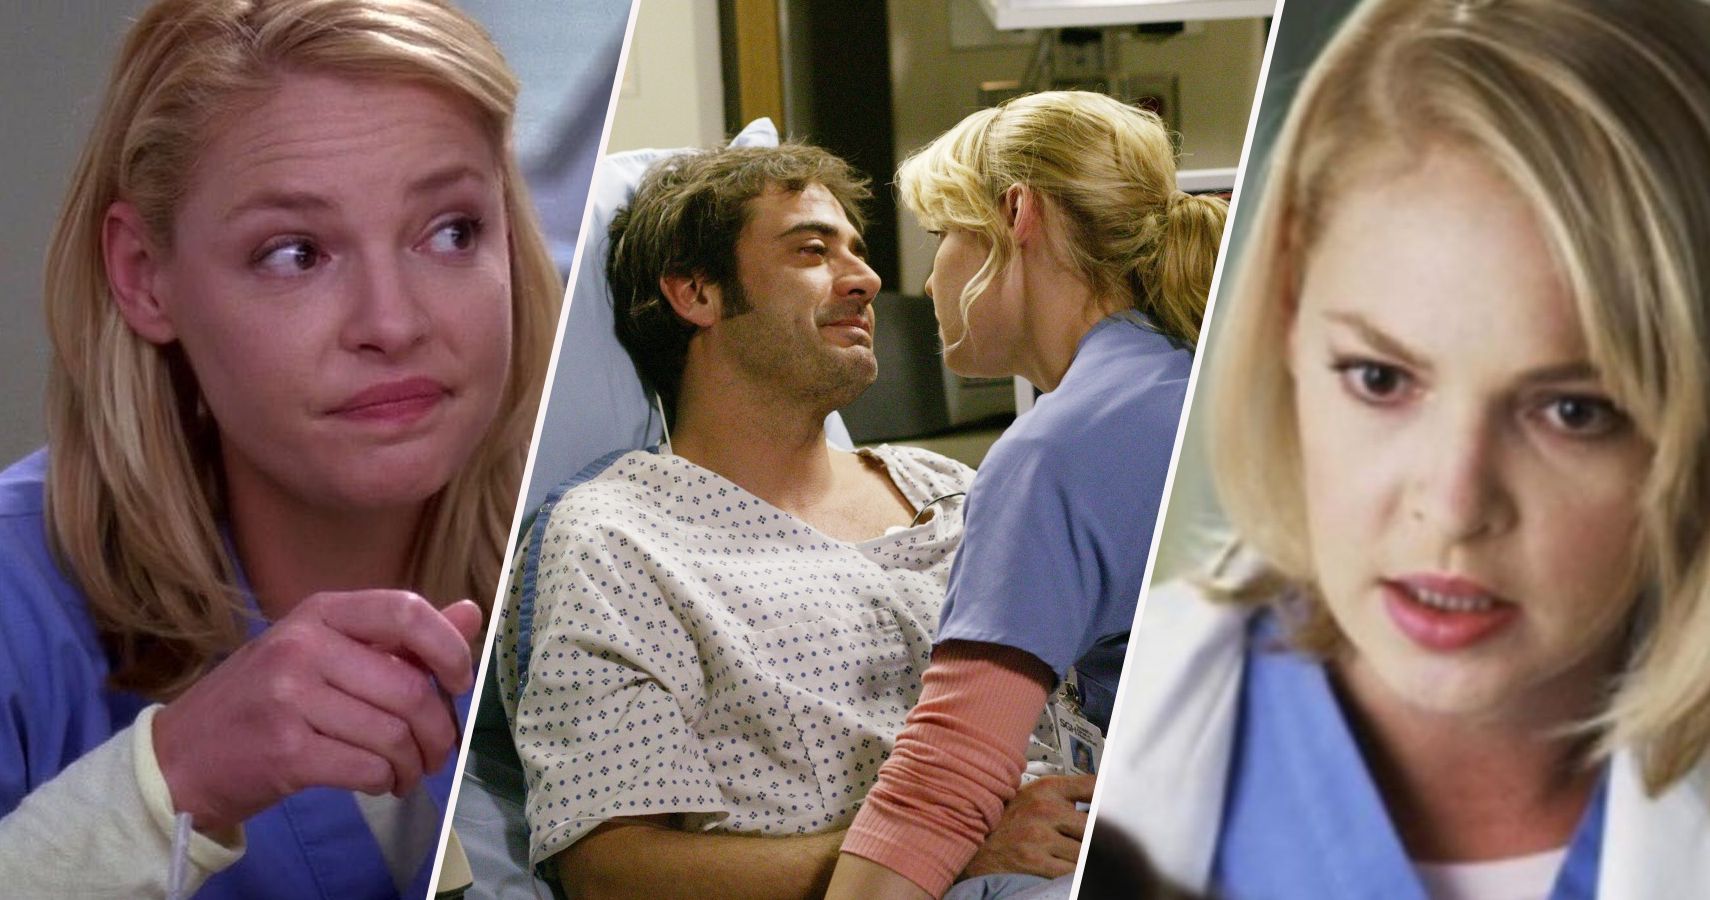 Grey's Anatomy: 20 Things Wrong With Izzie Stevens We All Choose To Ignore1710 x 900